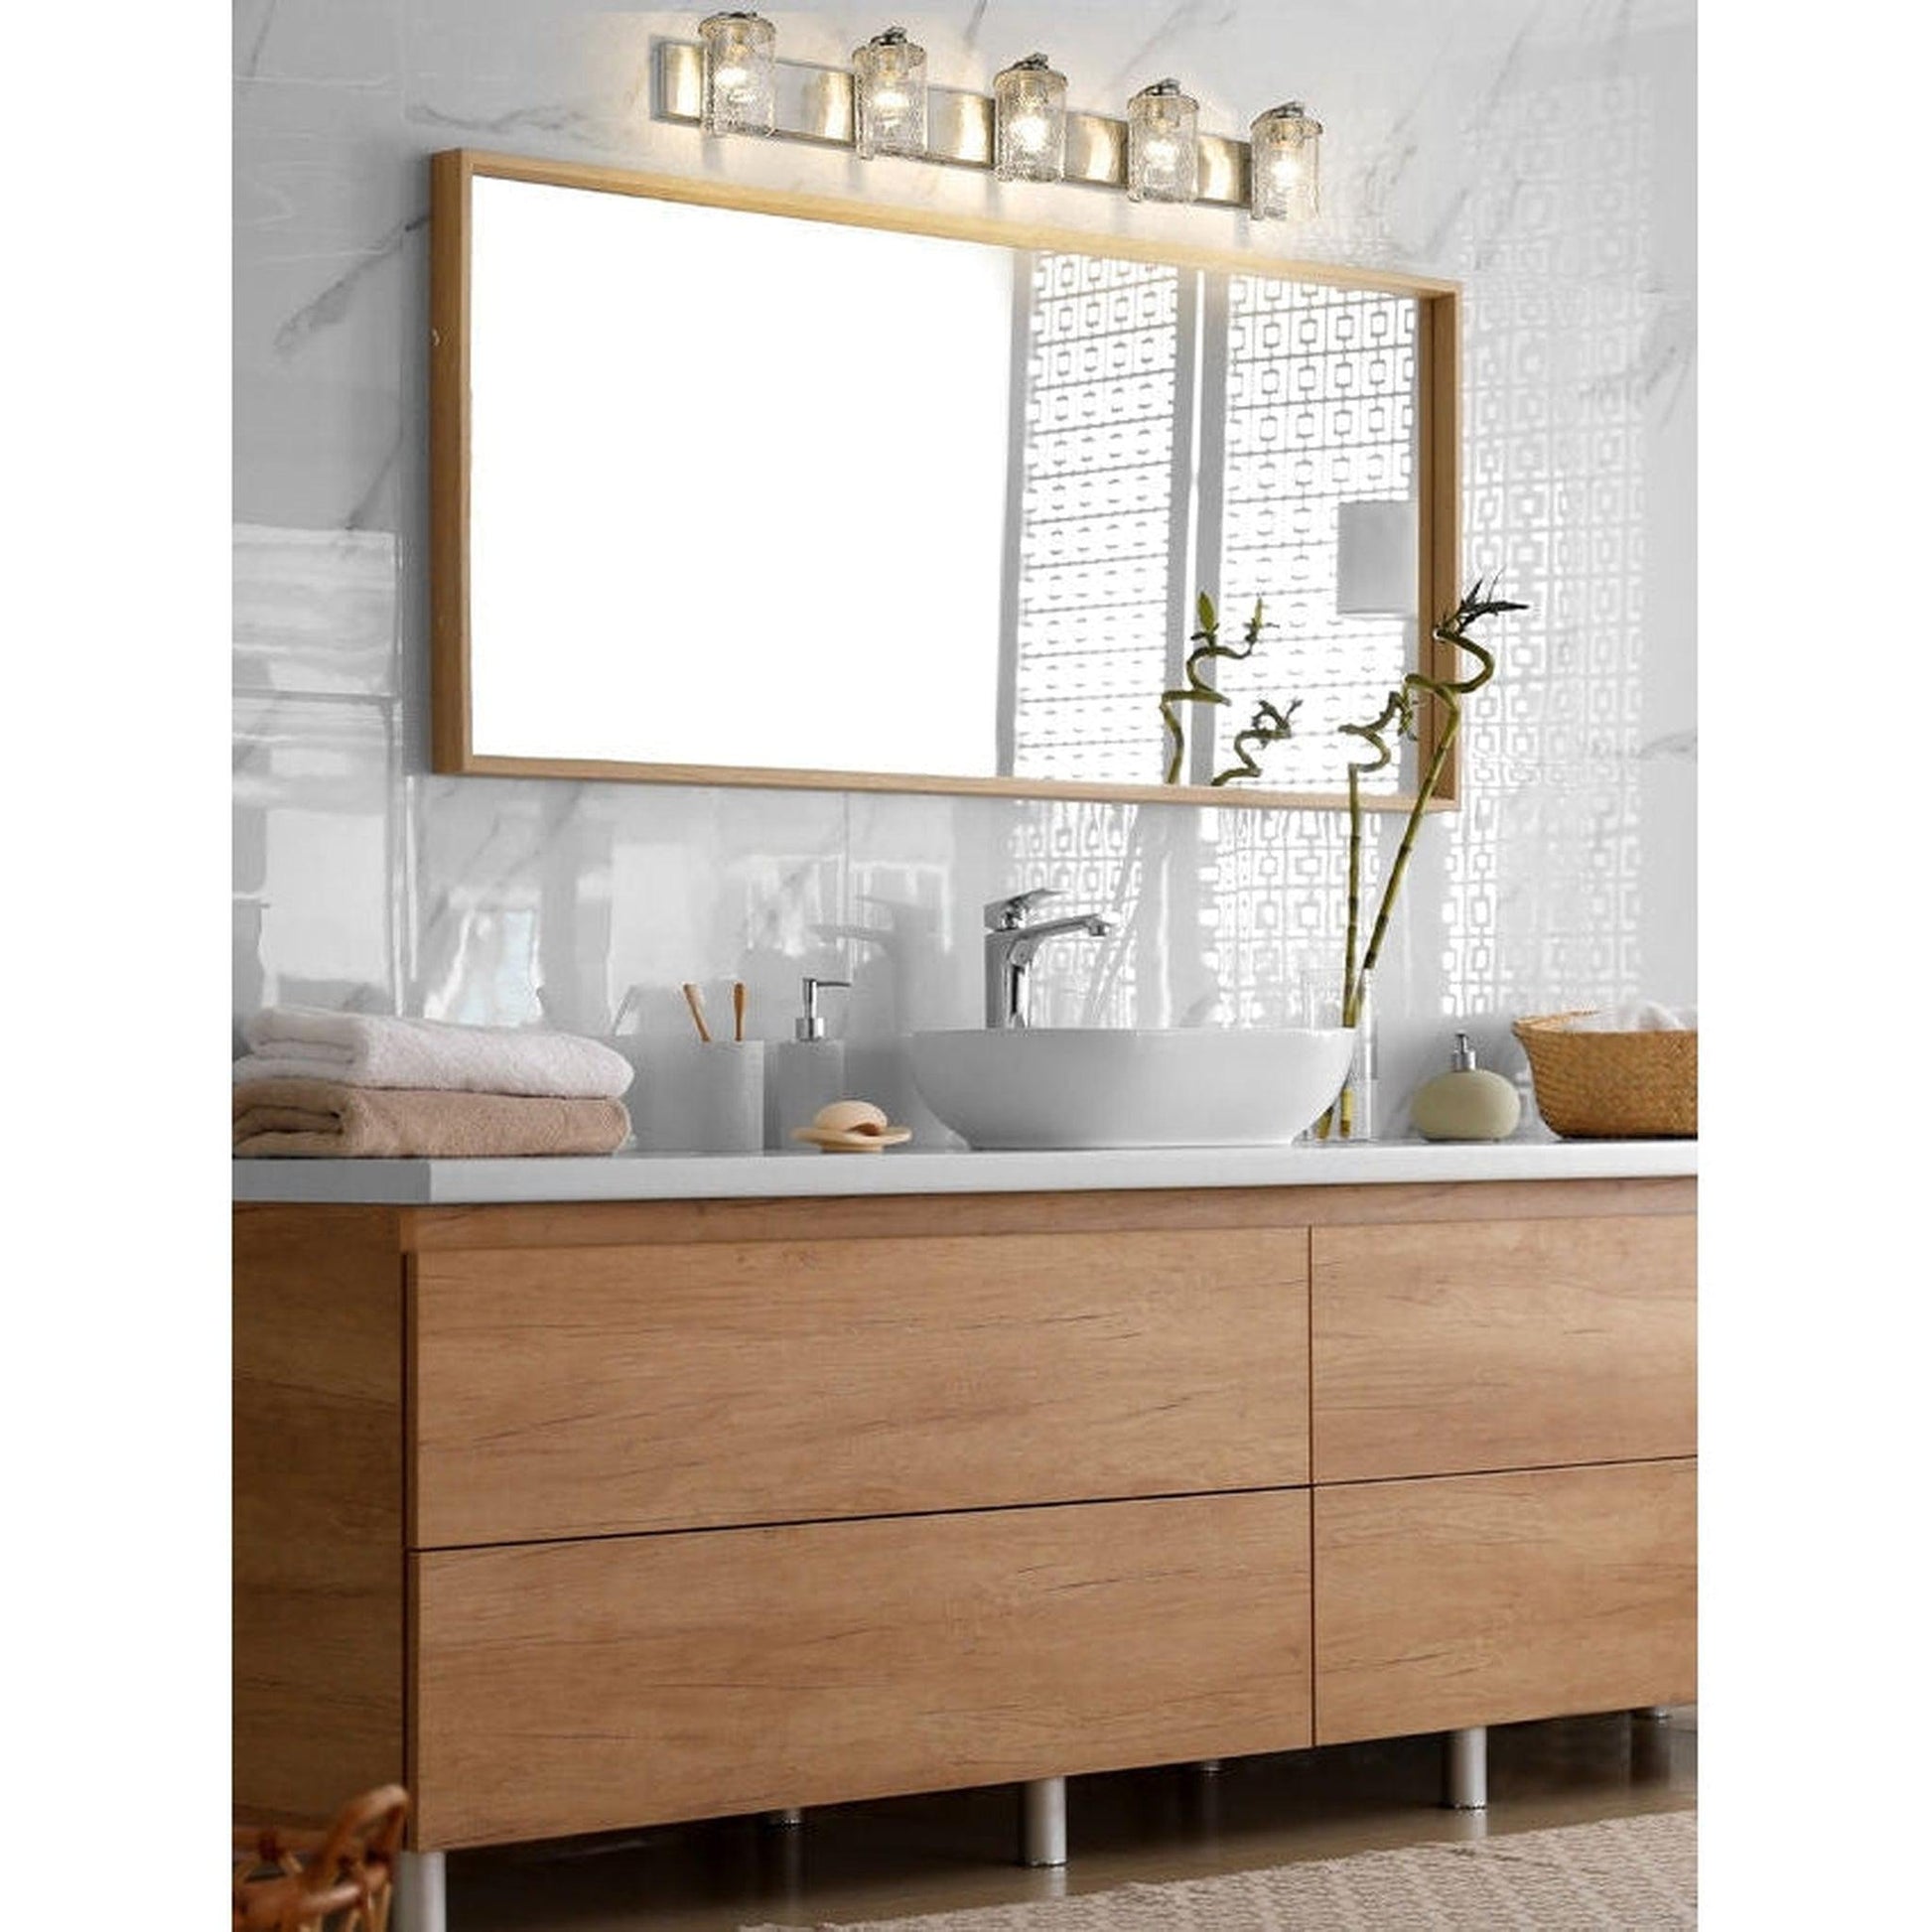 Z-Lite Beckett 42" 5-Light Brushed Nickel Vanity Light With Clear Seedy Glass Shade